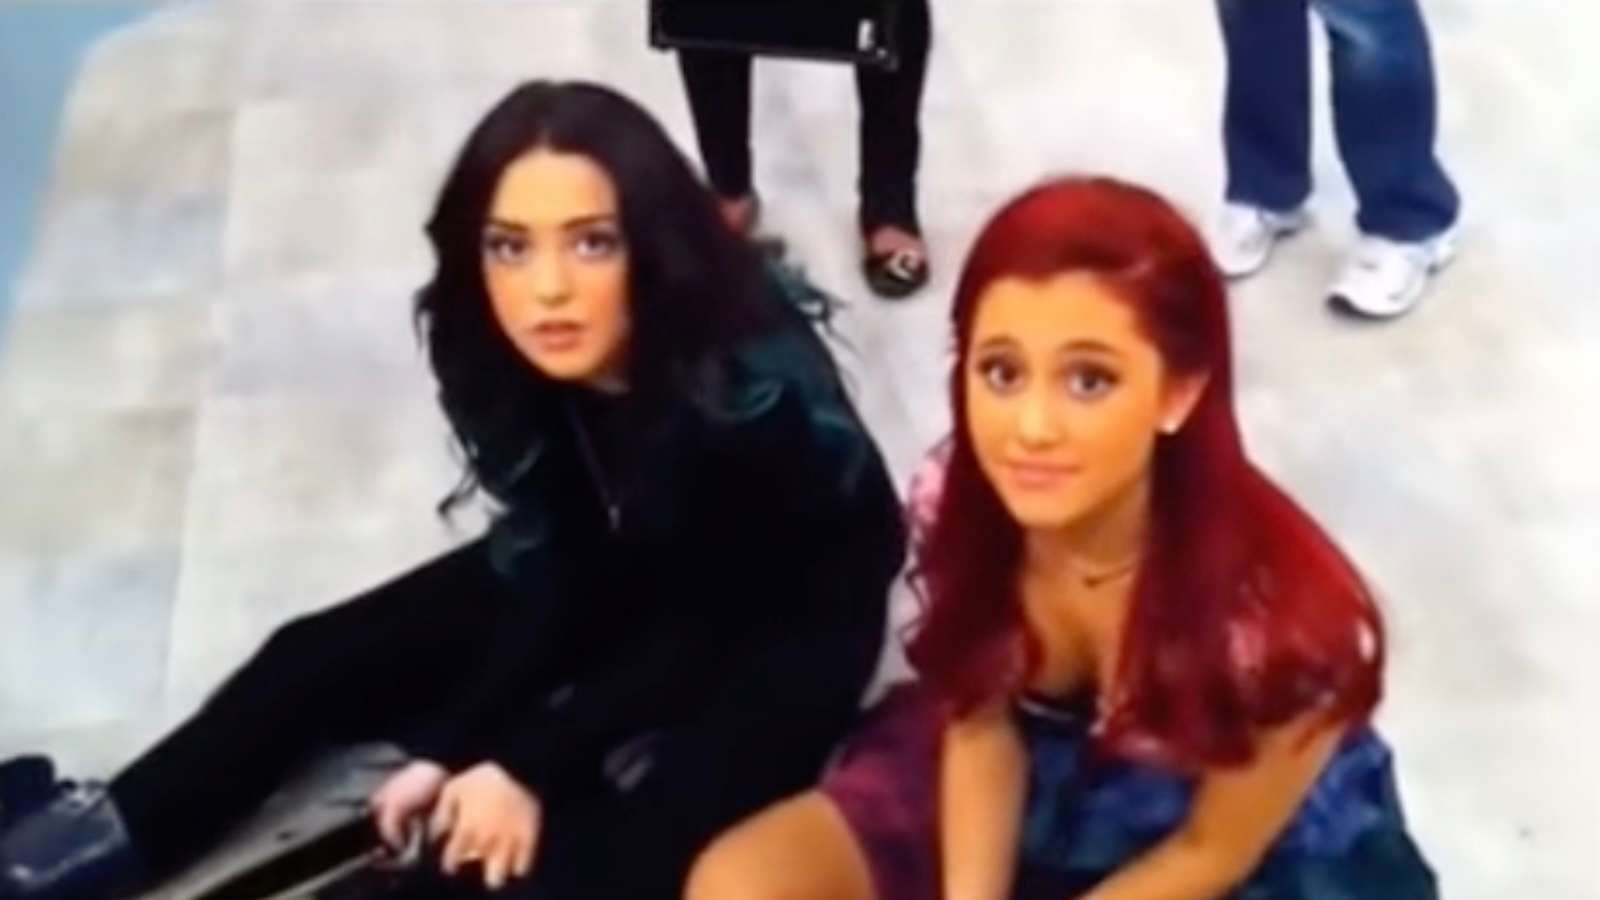 Liz Gillies and Ariana Grande in behind-the-scenes footage